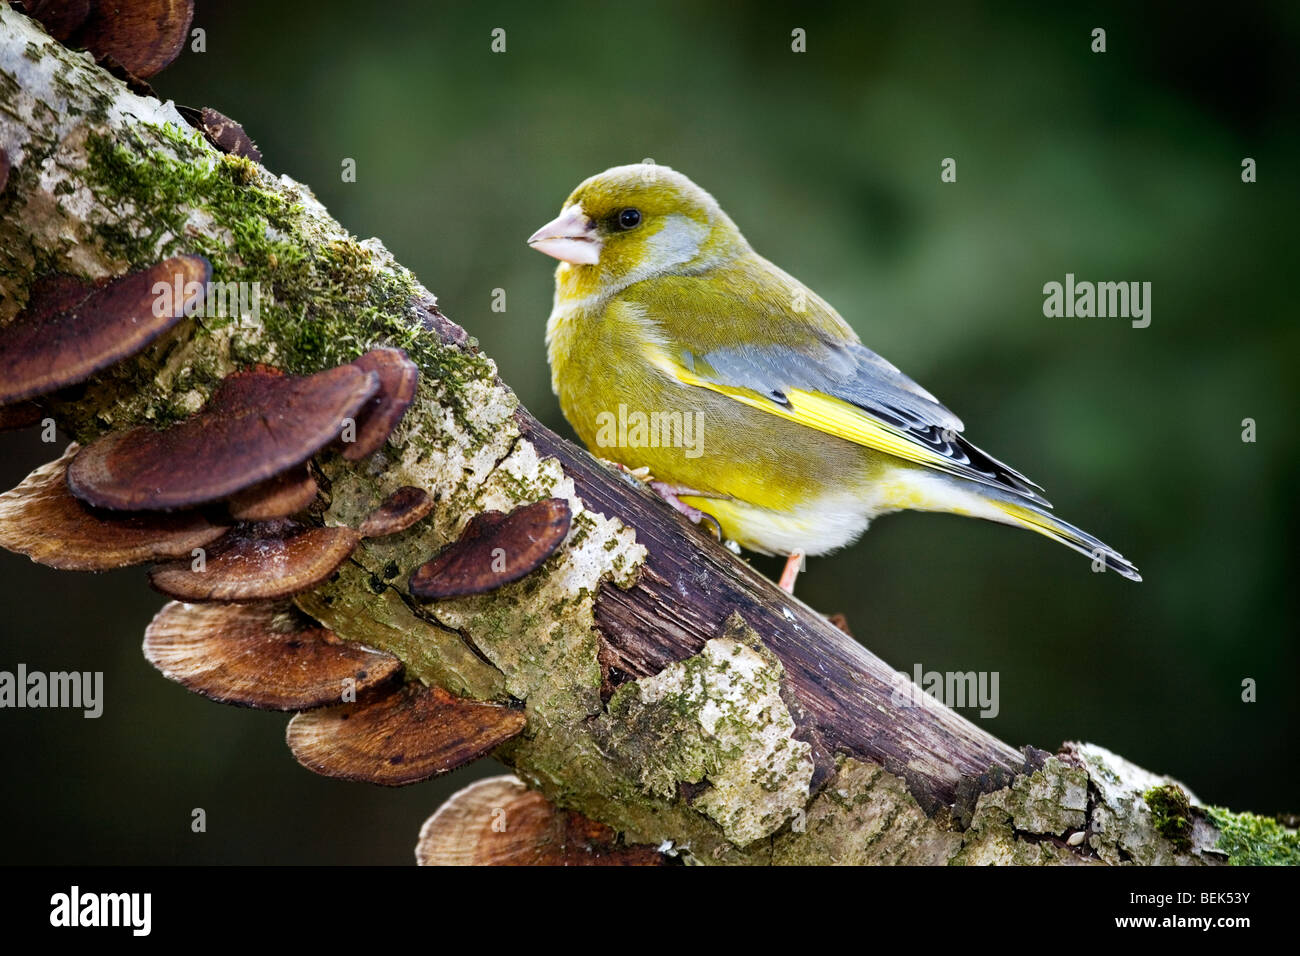 European Greenfinch male (Carduelis chloris) perched on branch Stock Photo